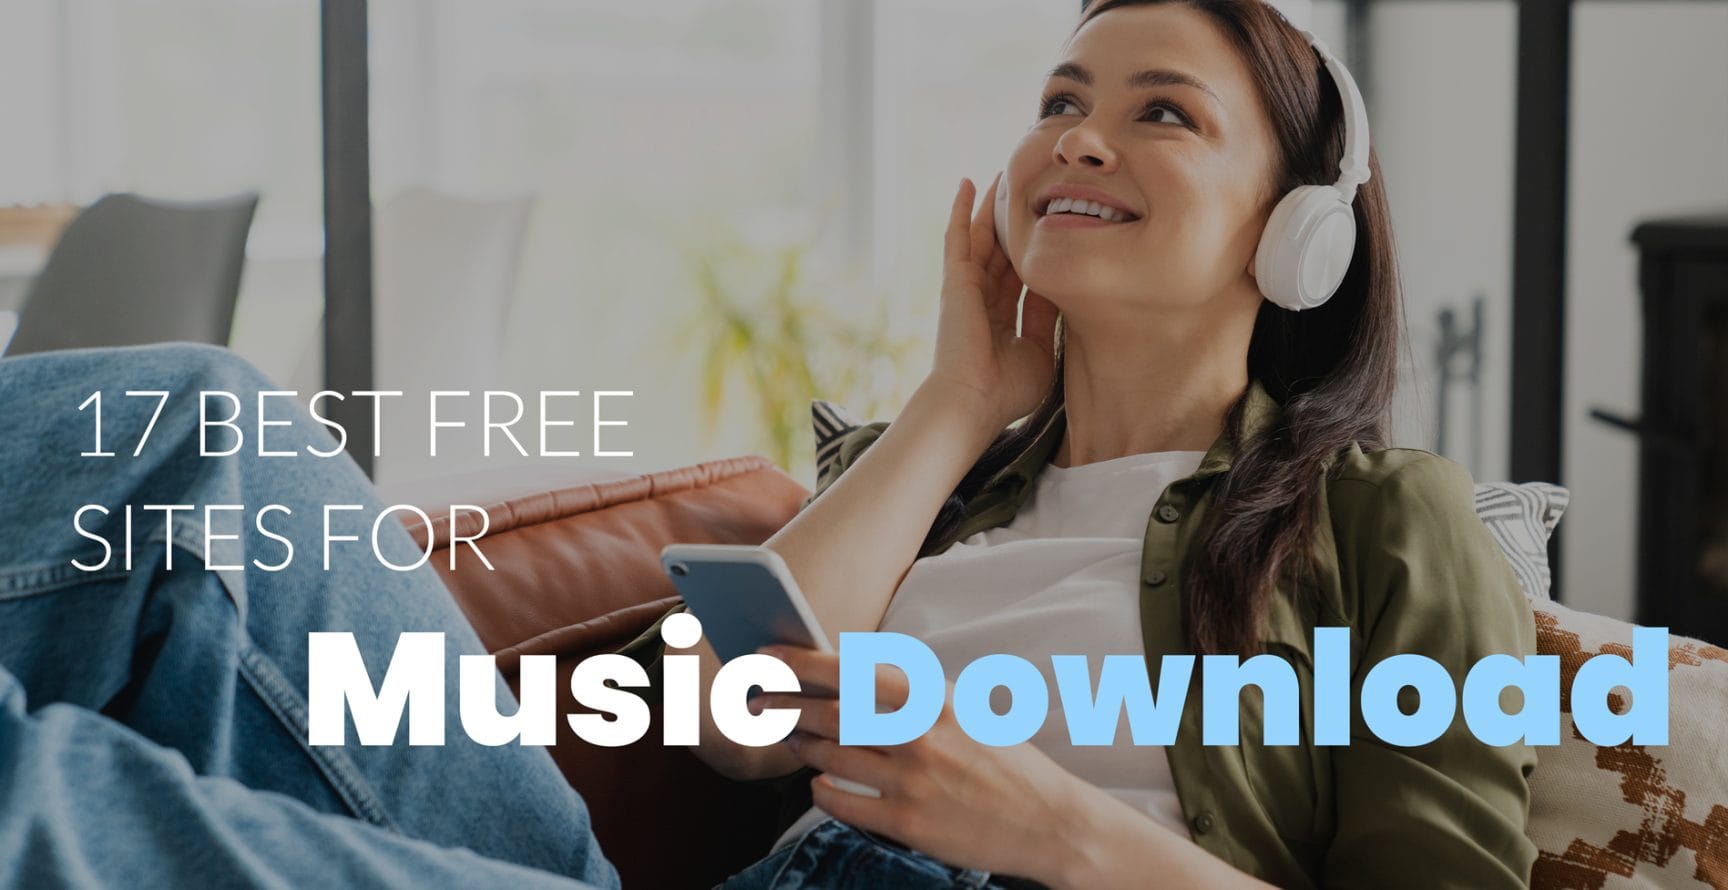 best free sites for music download